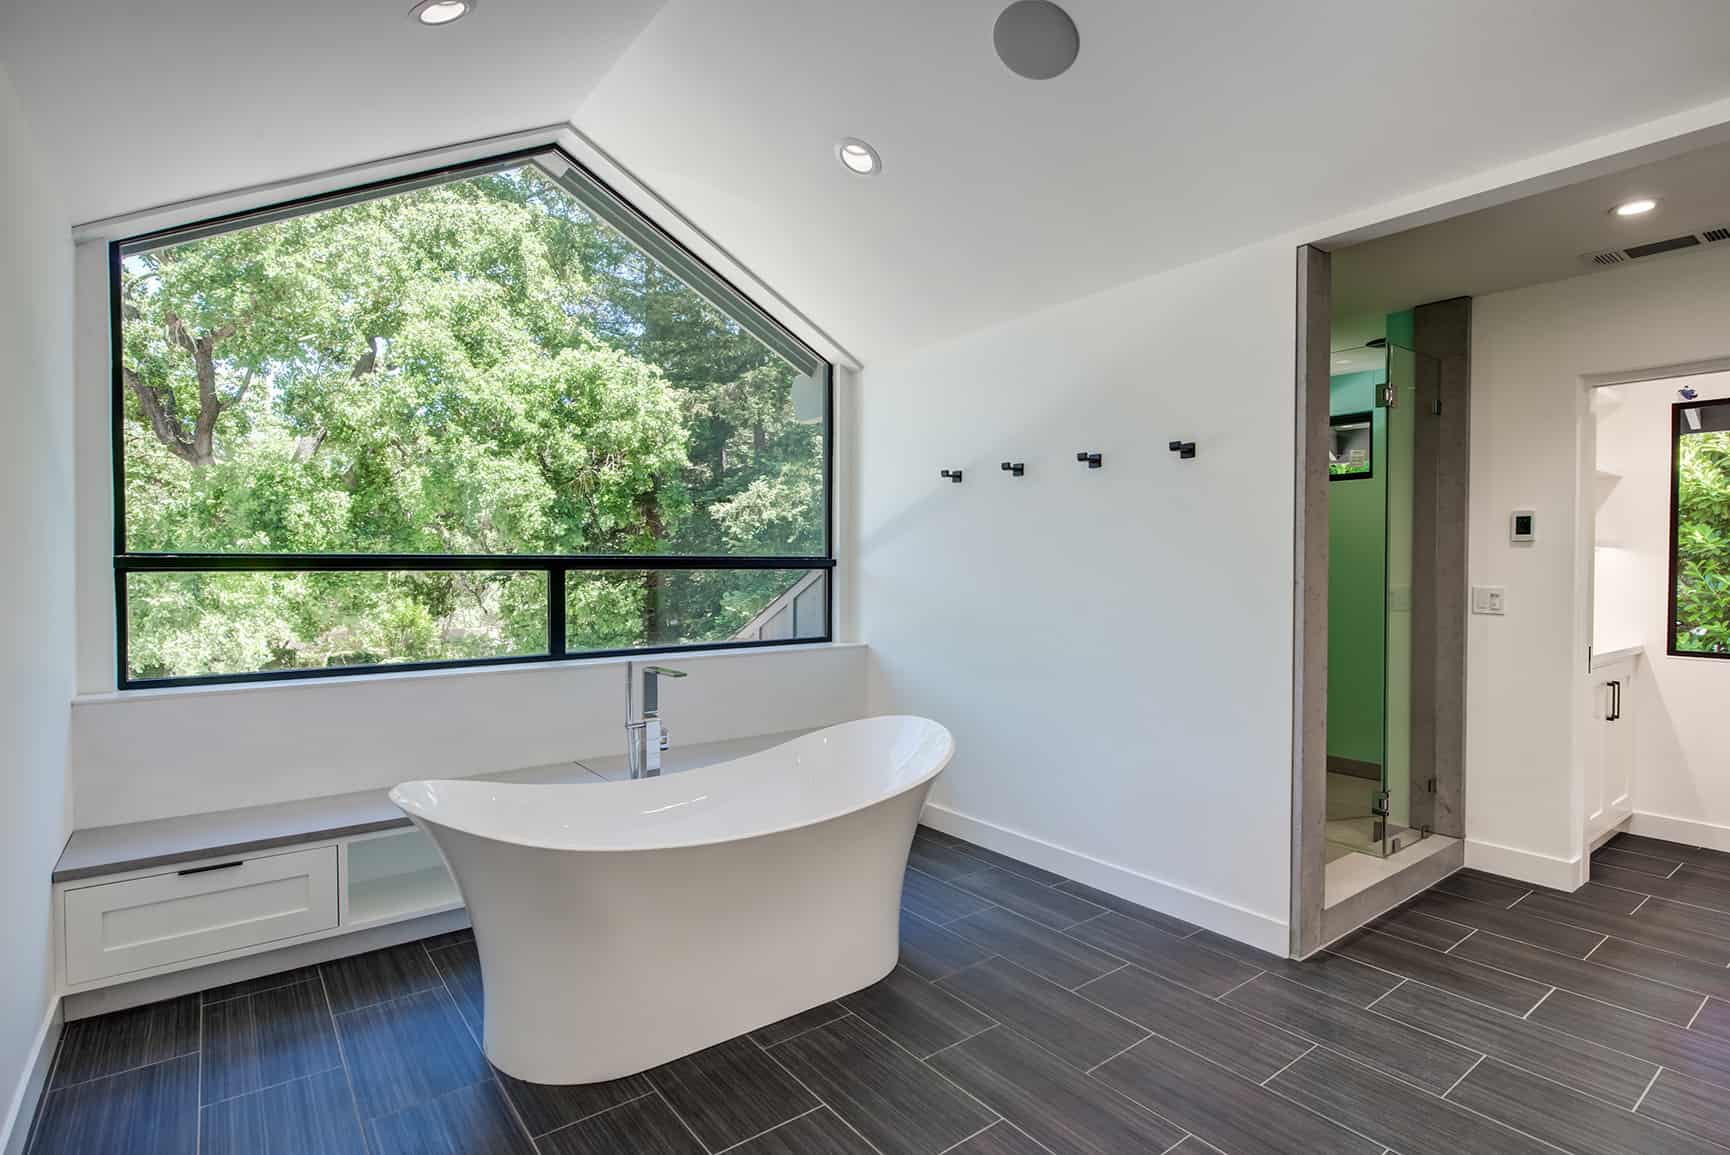 Freestanding bathtub in large master bathroom with view of treetops through large window.